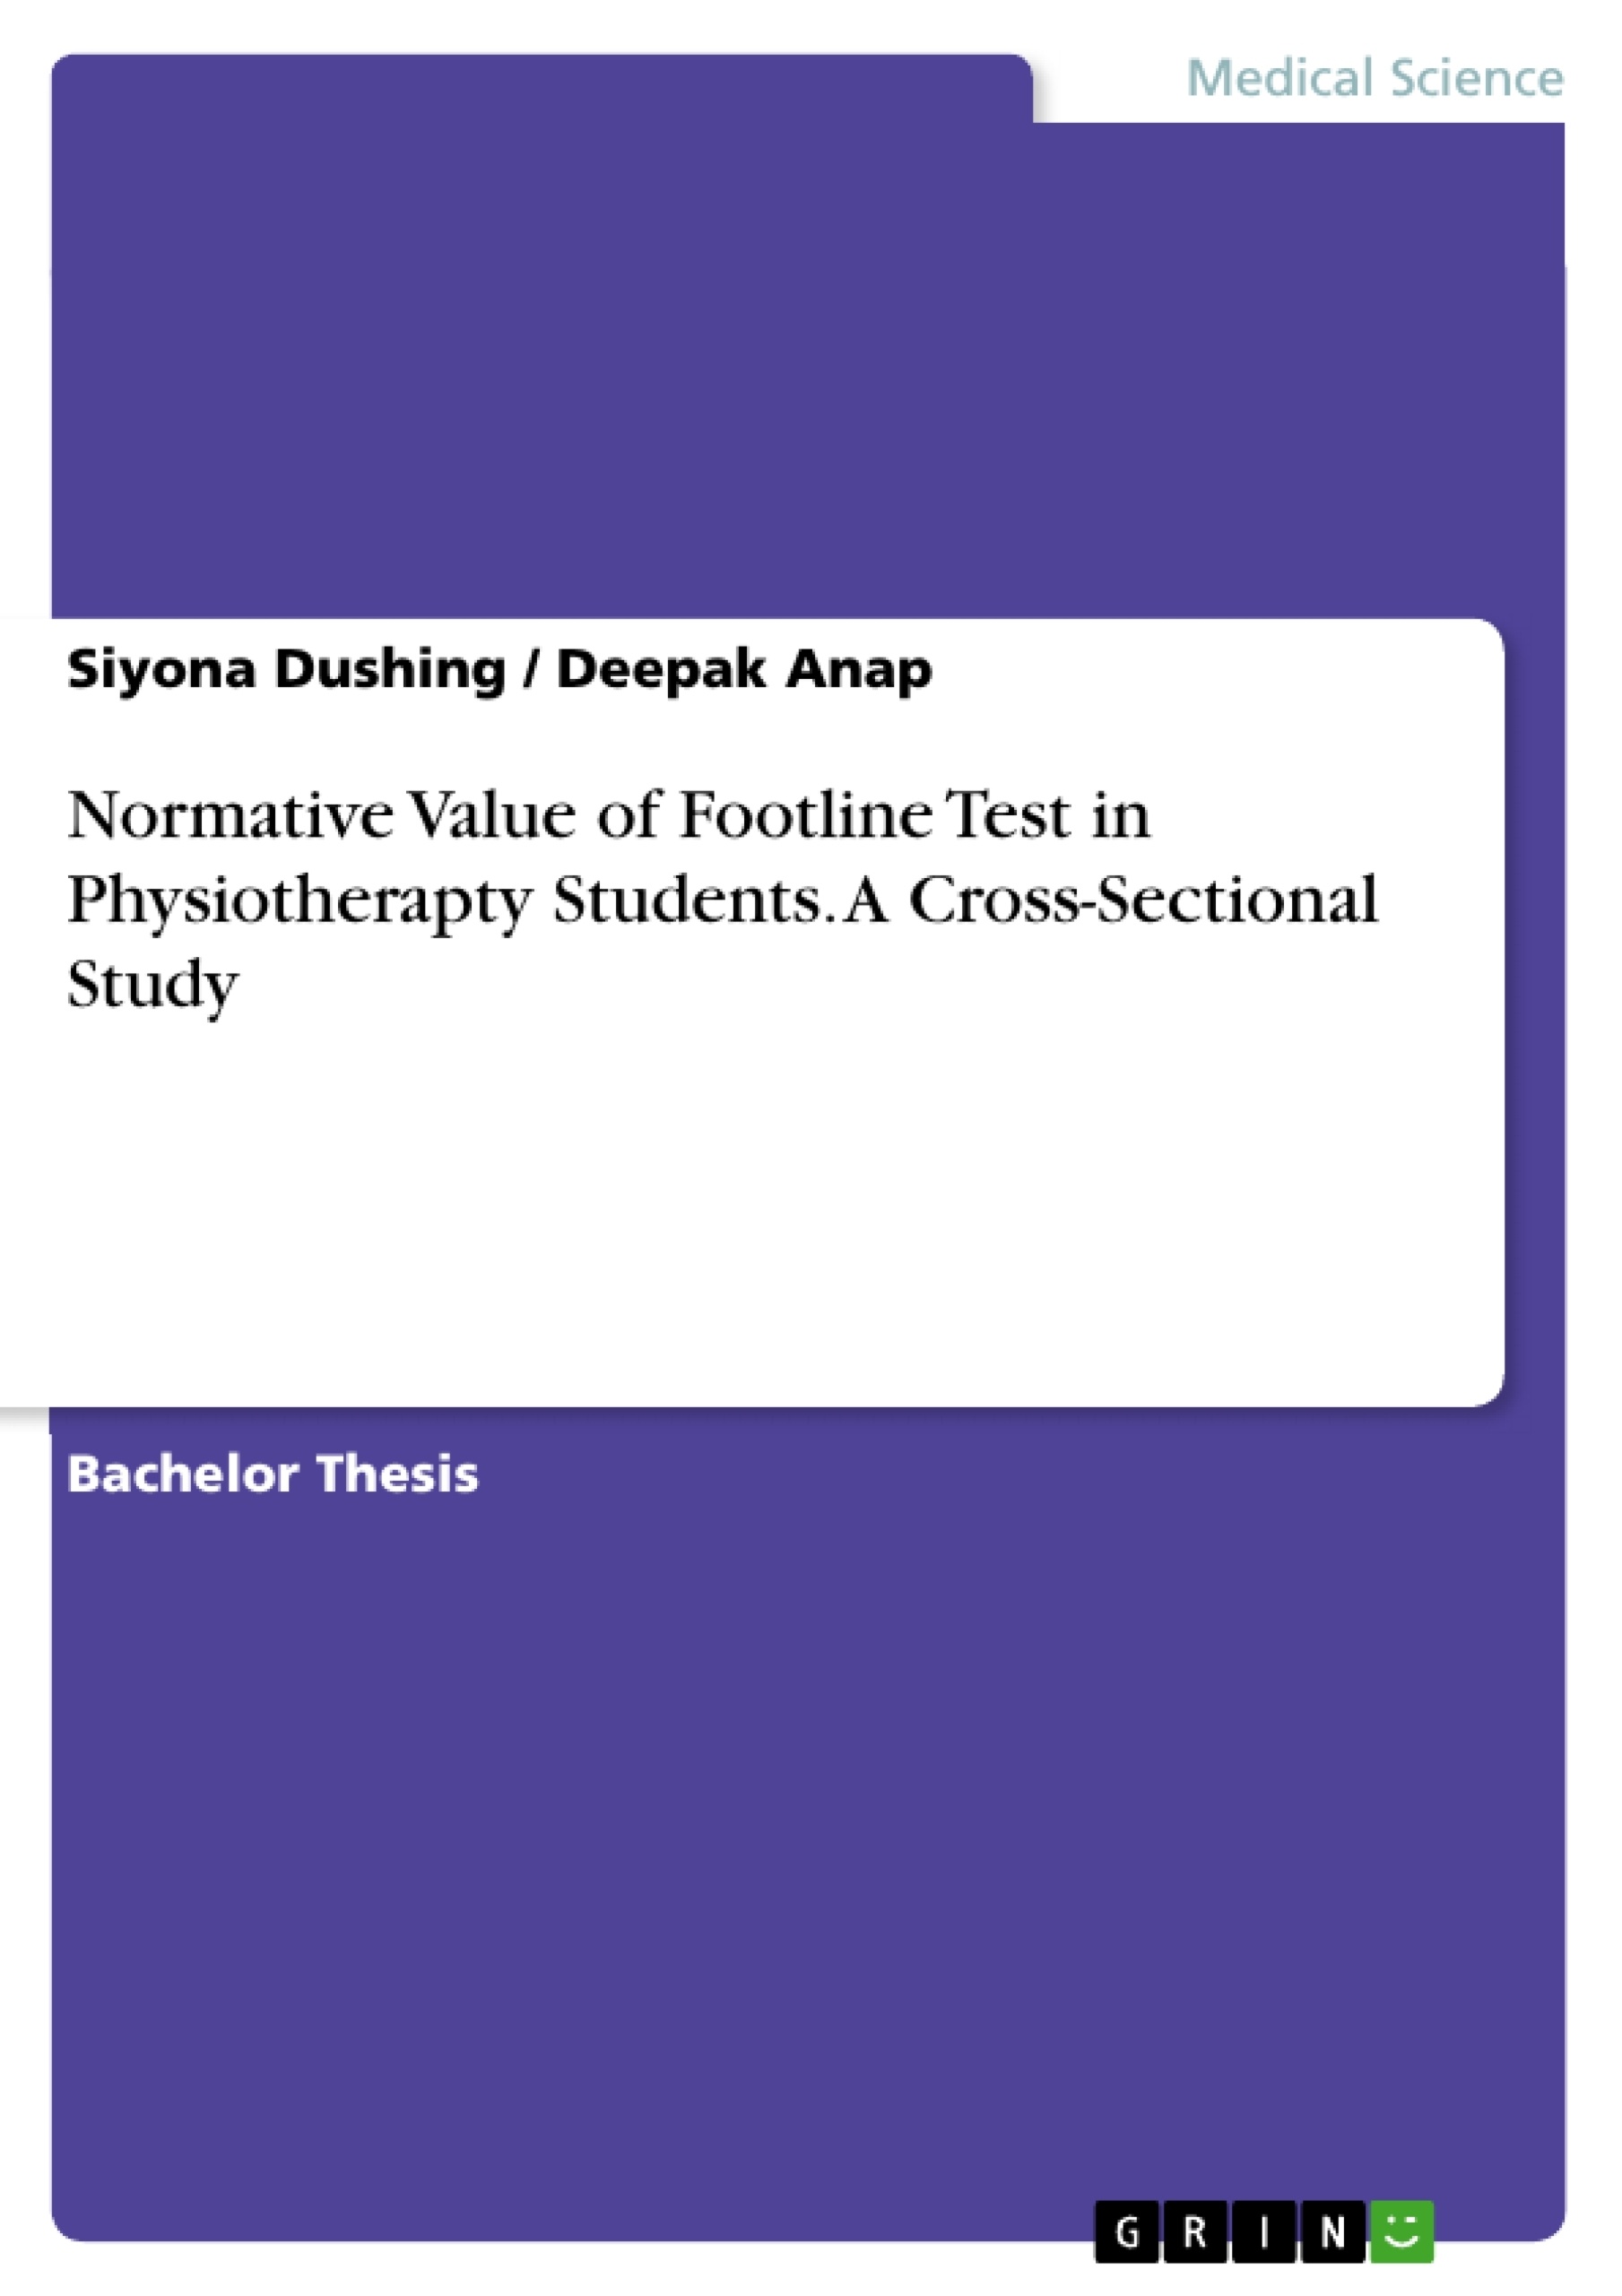 Title: Normative Value of Footline Test in Physiotherapty Students. A Cross-Sectional Study